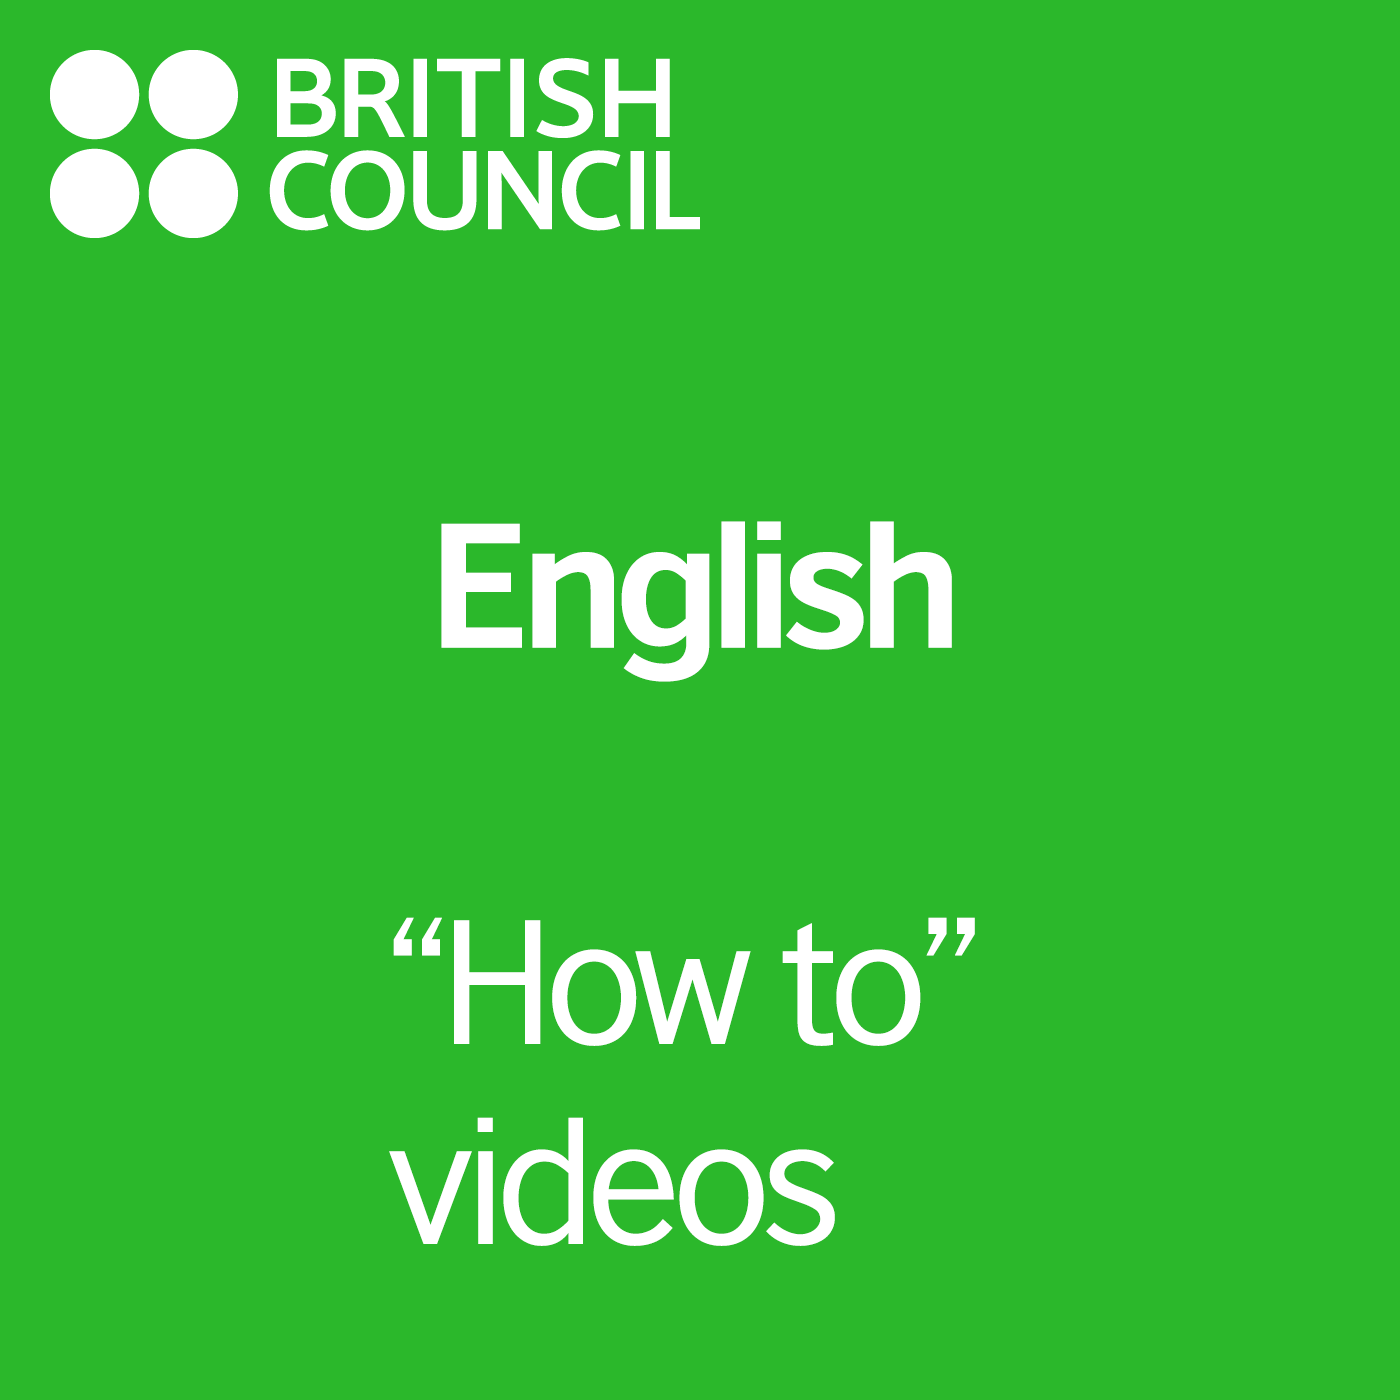 LearnEnglish - How To Videos